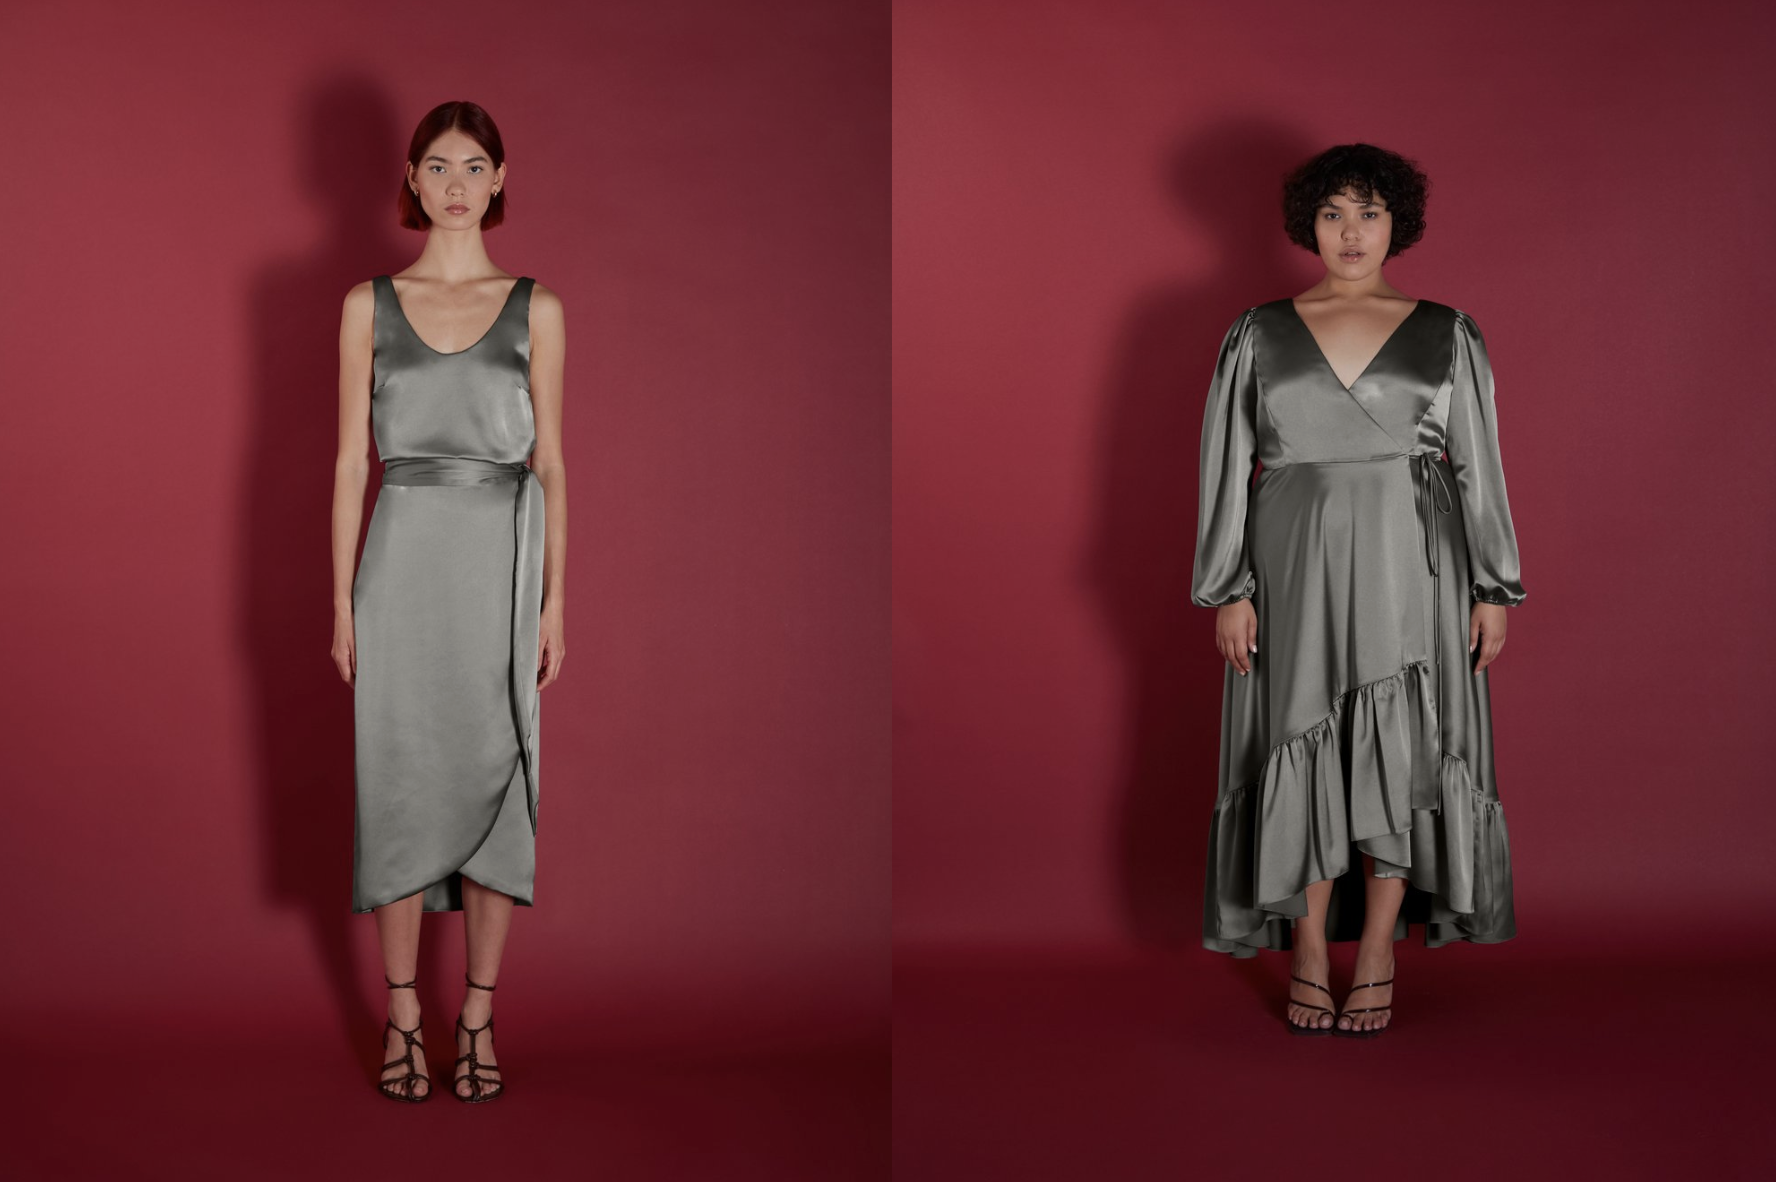 Halfpenny London Sister collection of bridesmaids dresses and separates in Pewter grey